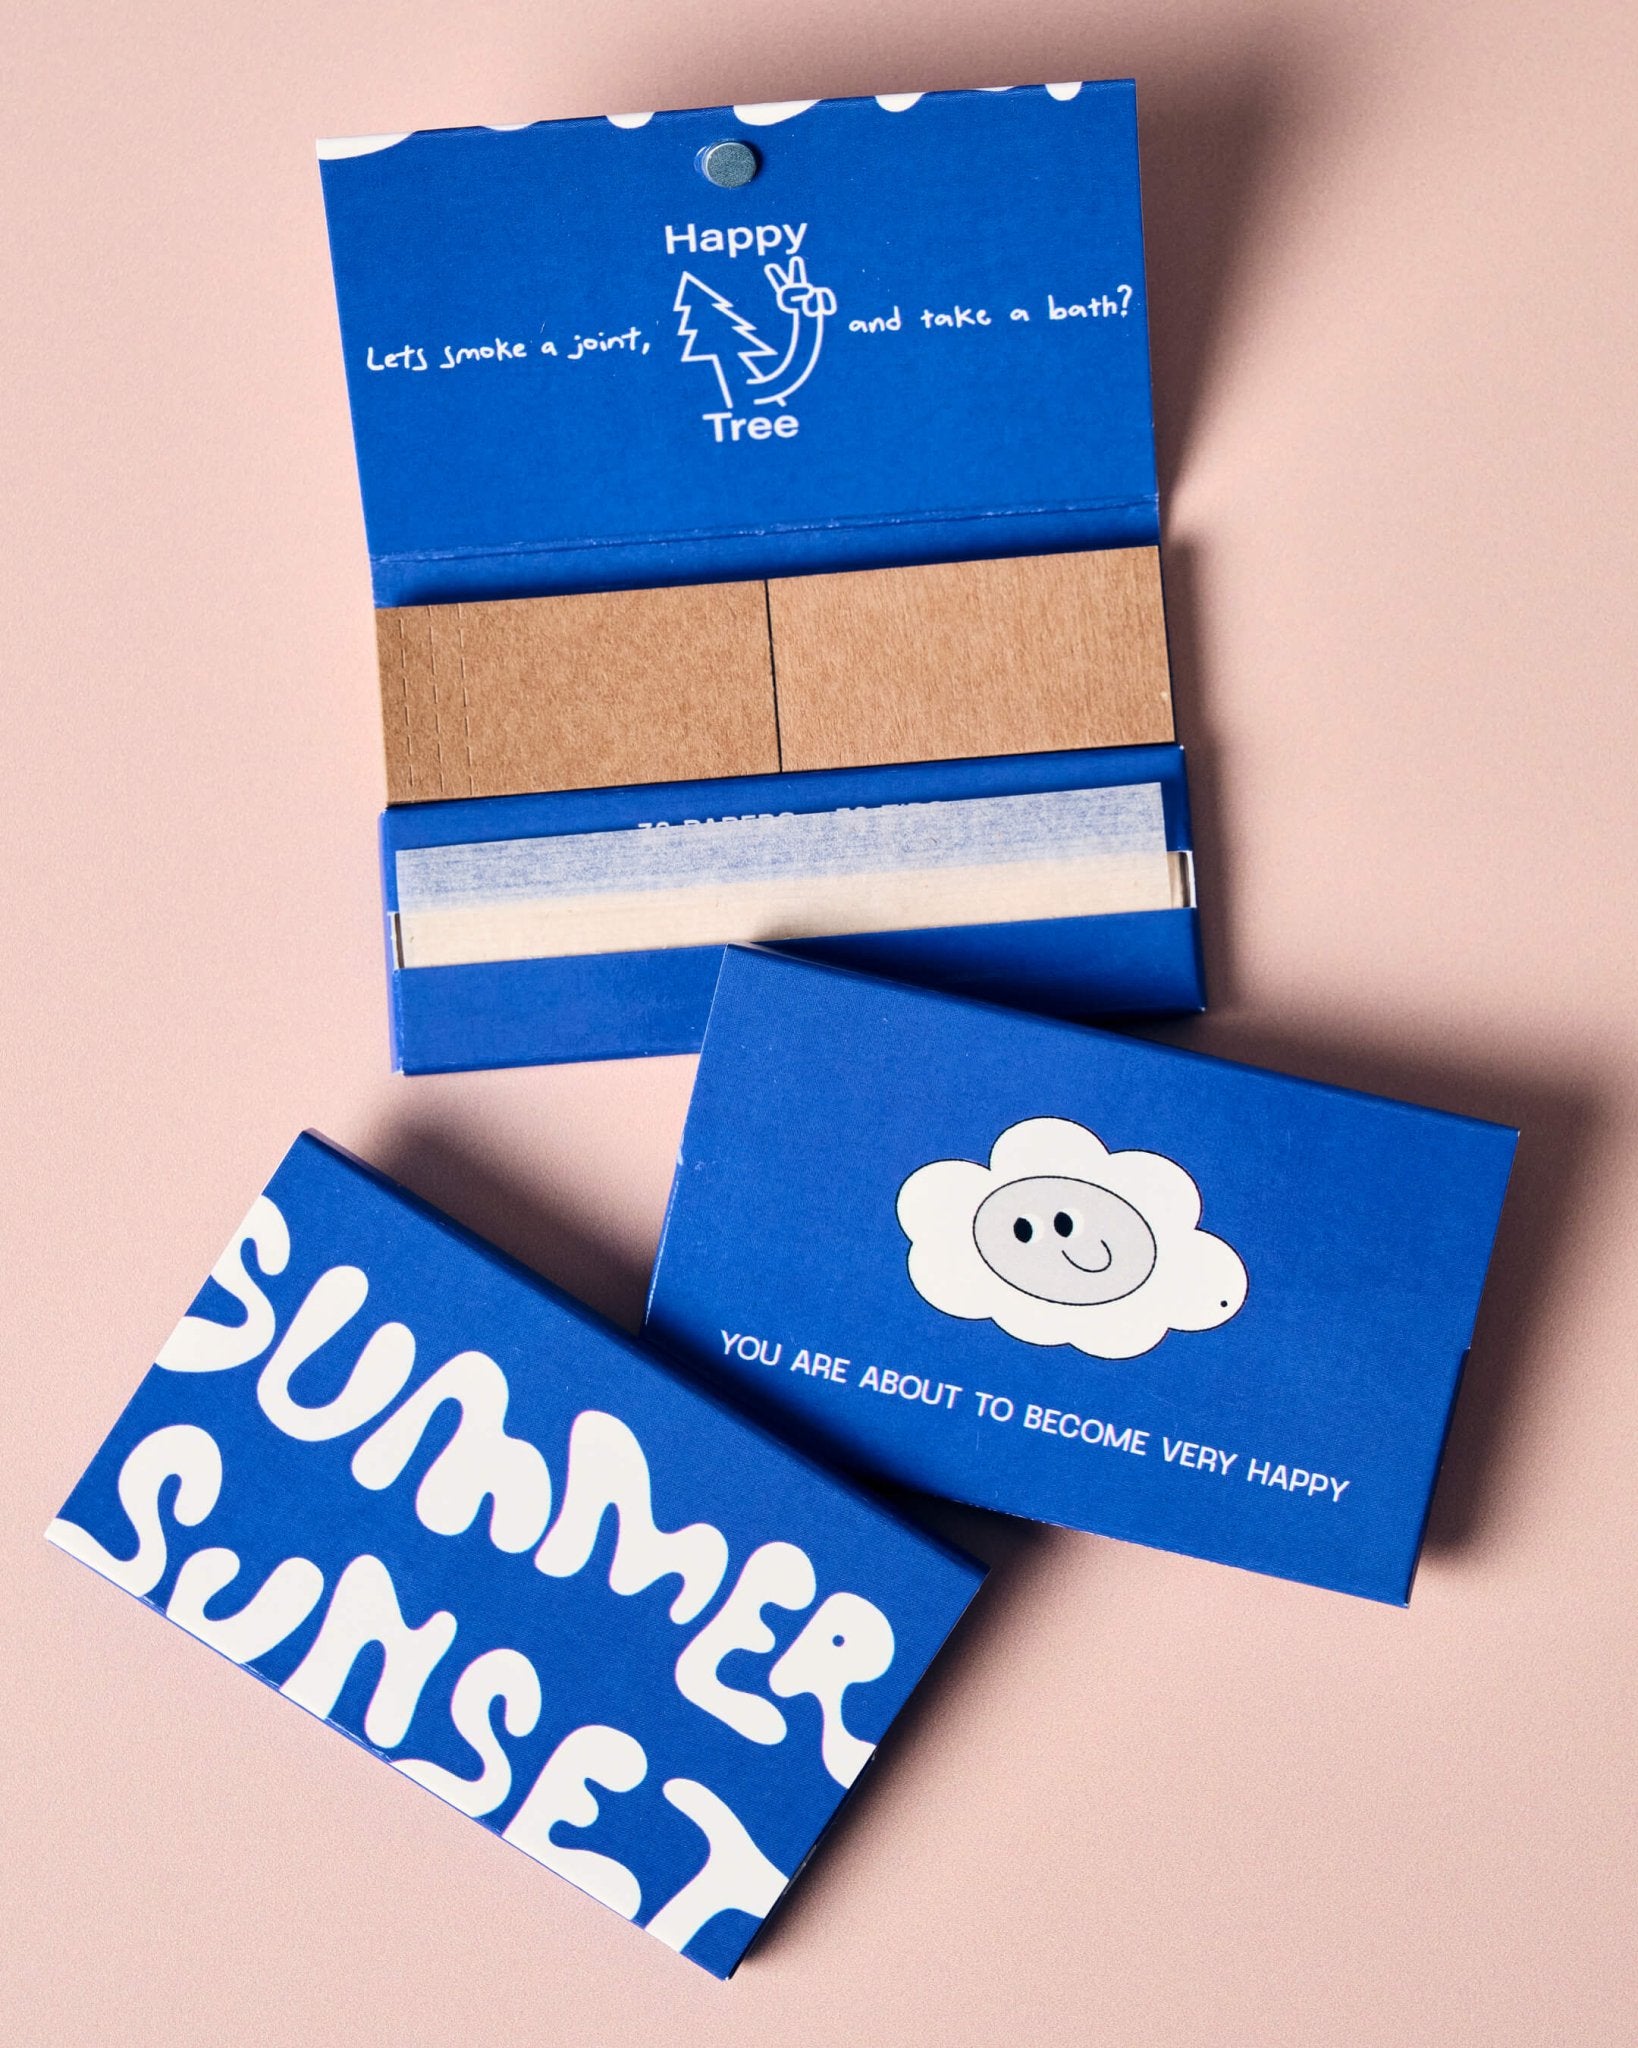 BLUE ROLLING PAPER KIT (with tips) - Summer Sunset -Blue Packaging - Hemp Paper